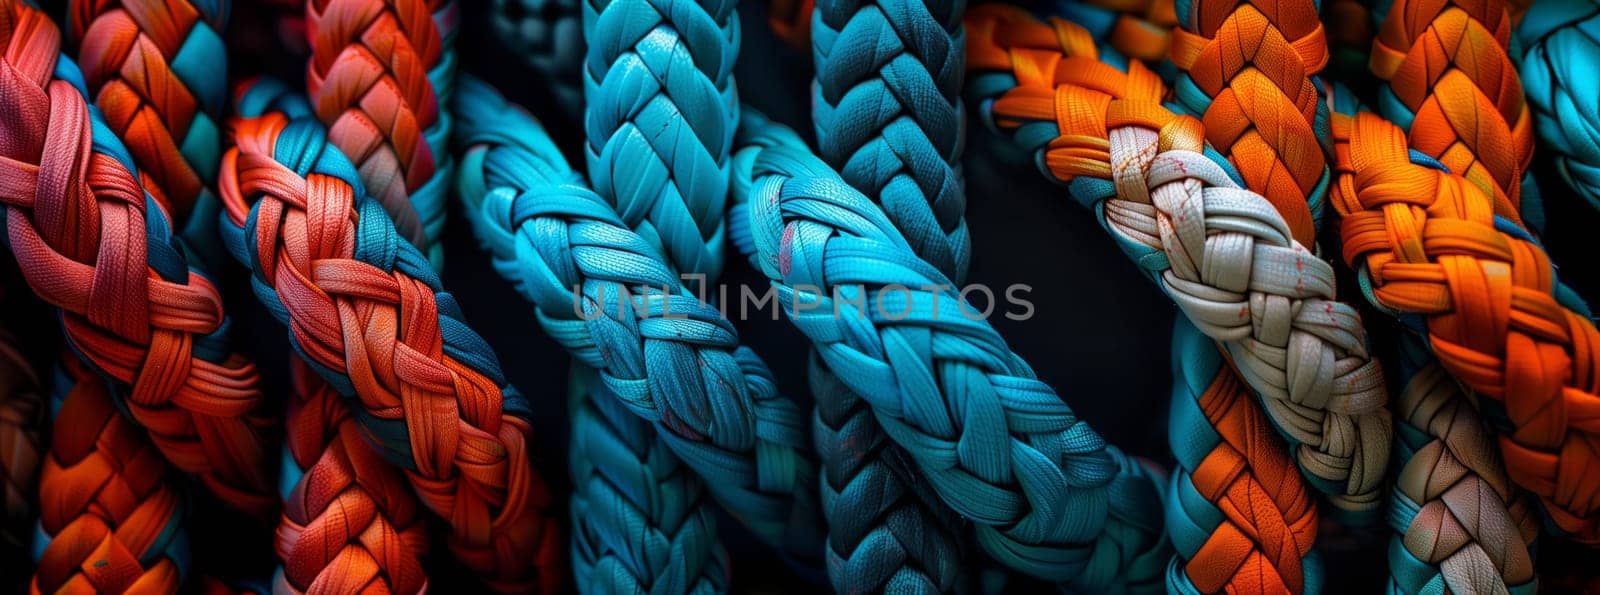 A closeup of vibrant textile ropes in electric blue, magenta, and other colors, creating a beautiful pattern. Perfect for an art event or fashion accessory